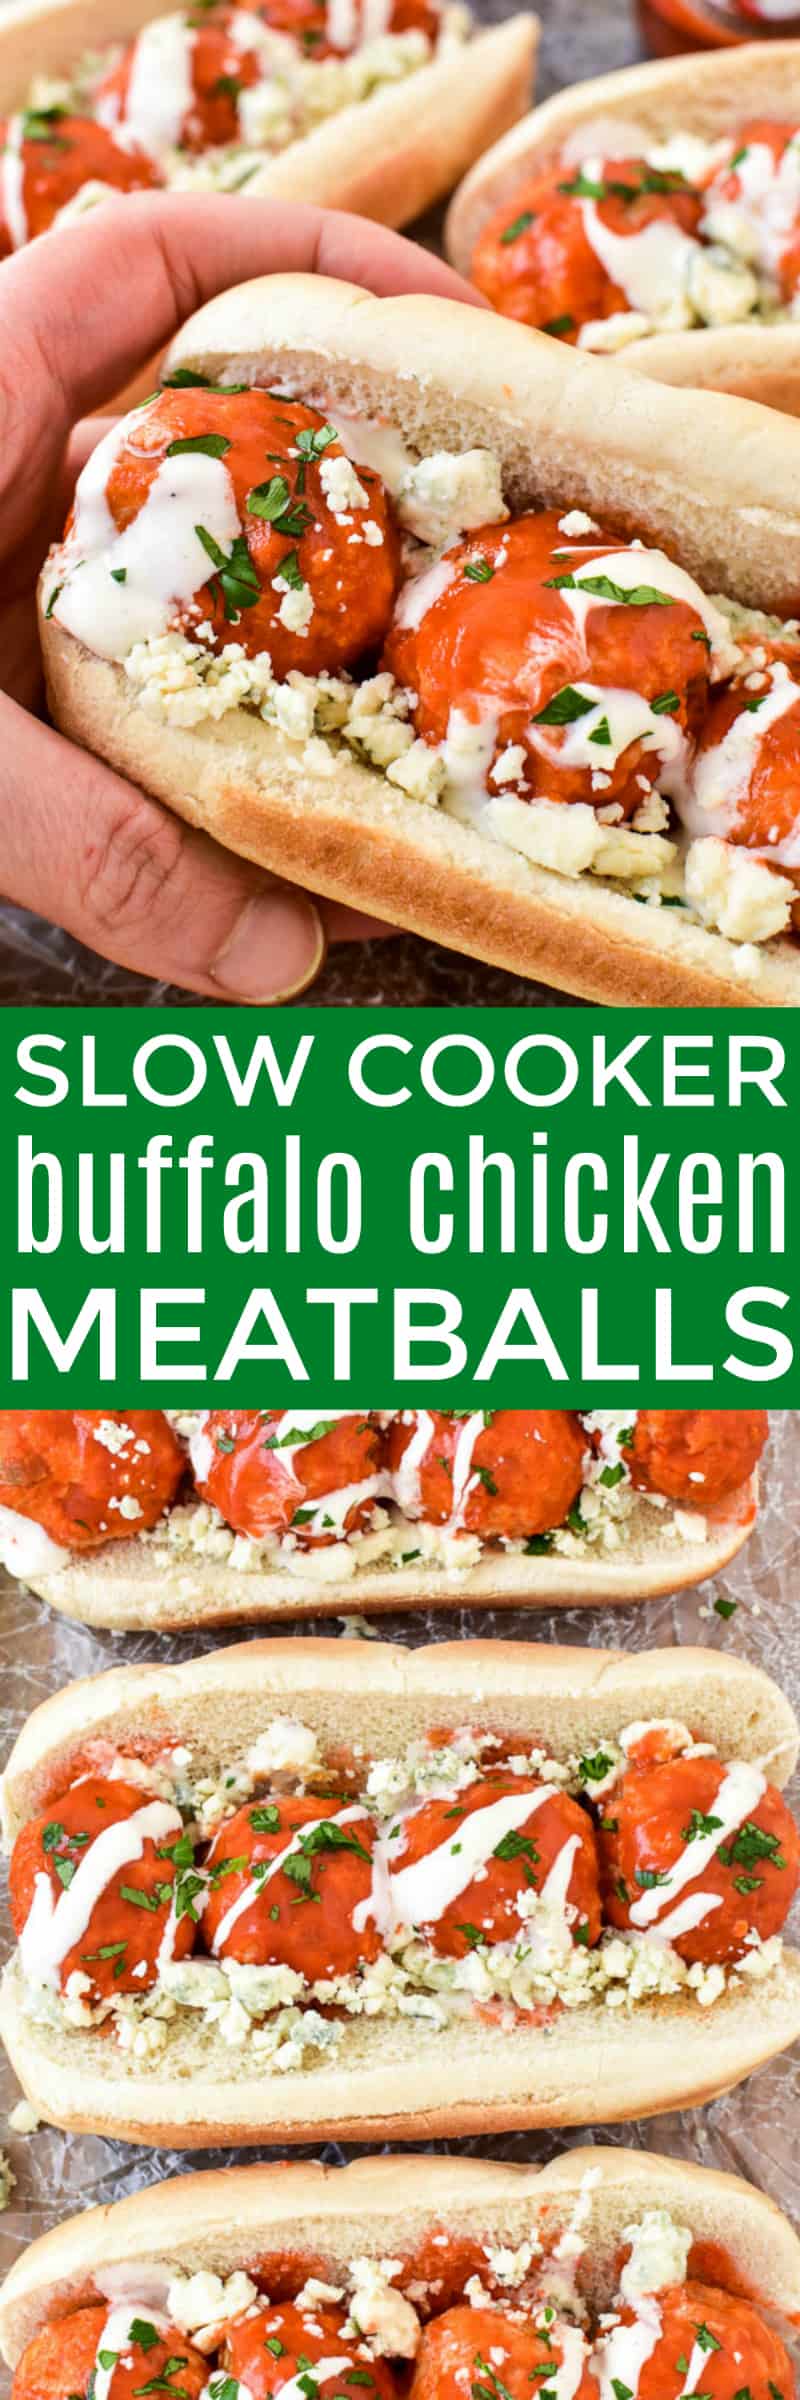 Buffalo Chicken Meatballs...made in the slow cooker! These meatballs are loaded with delicious ingredients and packed with the BEST flavor. They make a great easy appetizer or sandwich, and are perfect for game days, parties, or summer tailgating.